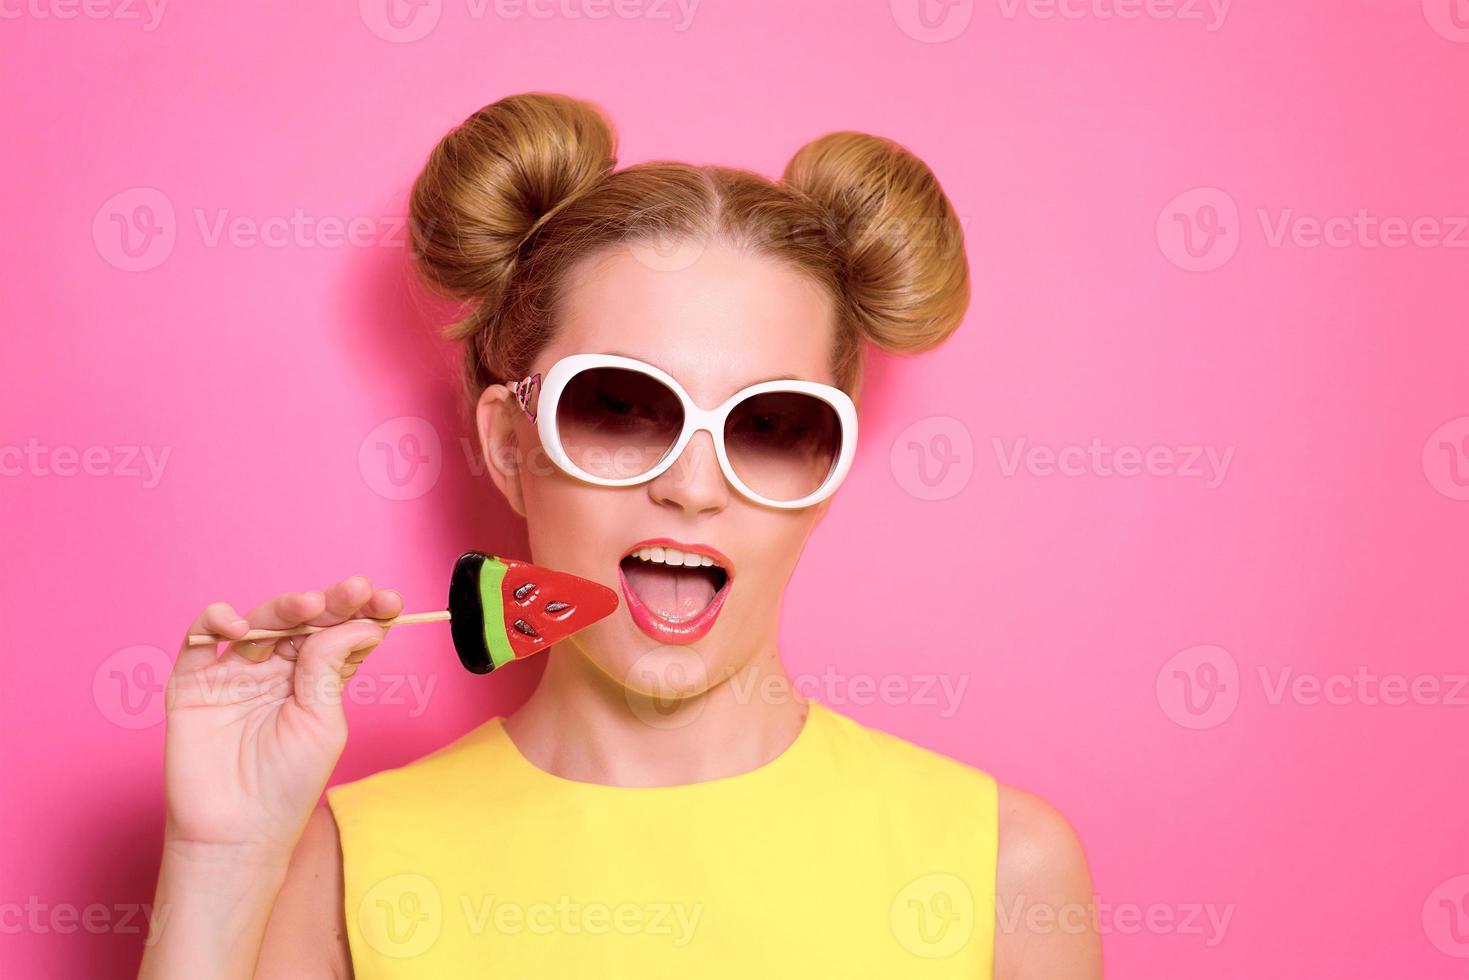 Portrait of stylish cute young blonde woman in sunglasses with colorful watermelon lollipop on pink background photo